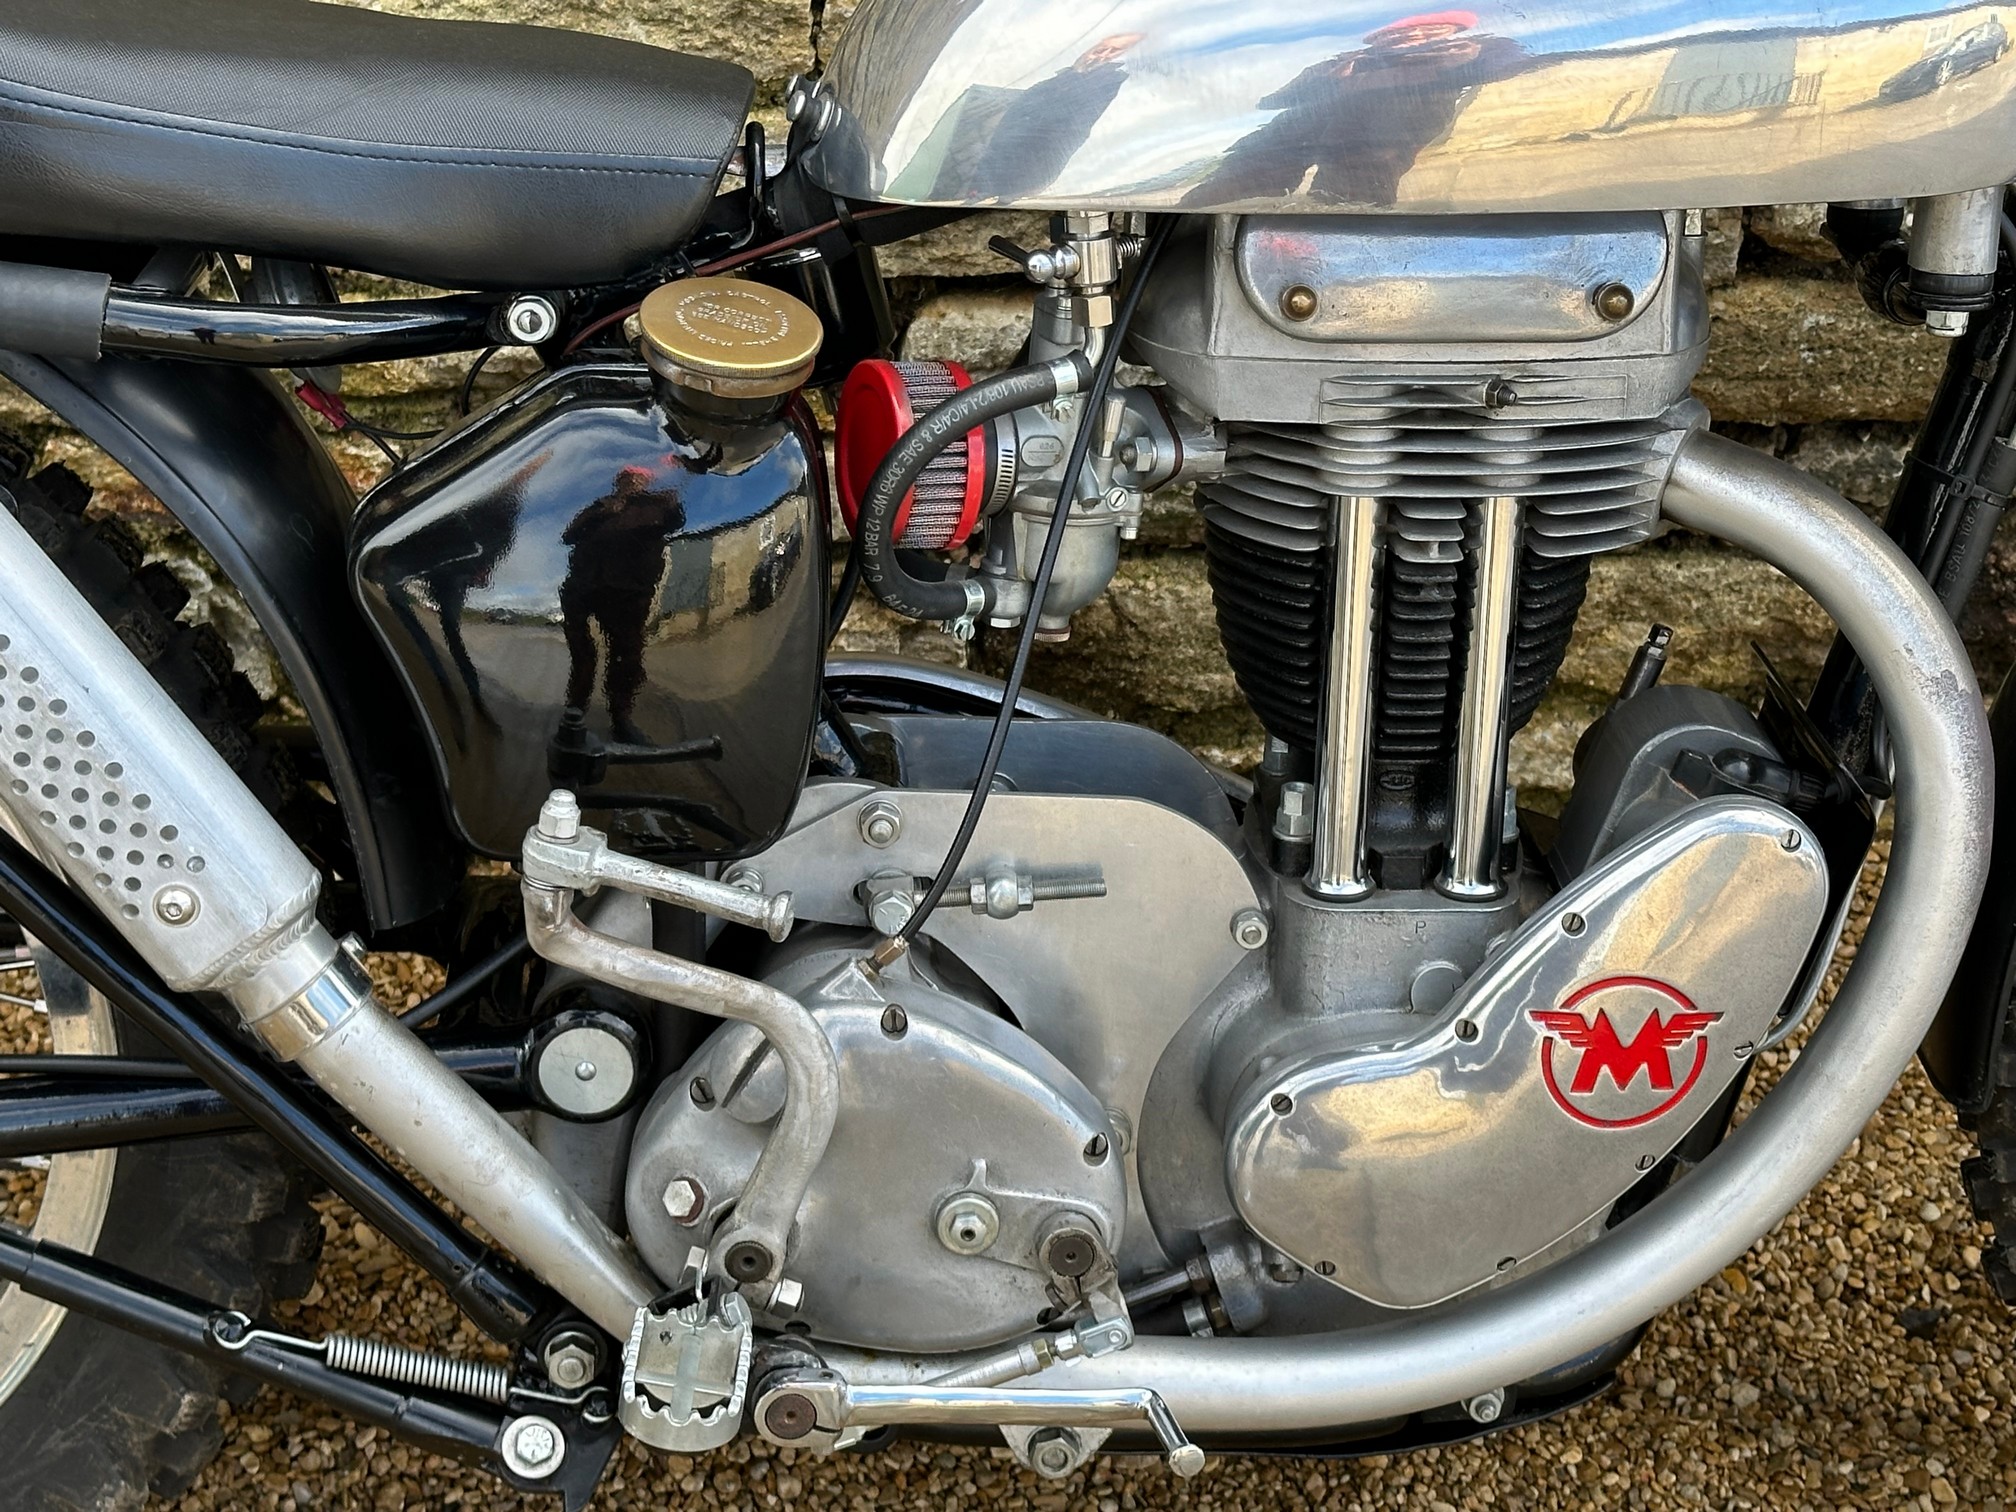 1953 MATCHLESS 350cc GREEN LANE SPECIAL - Image 3 of 9